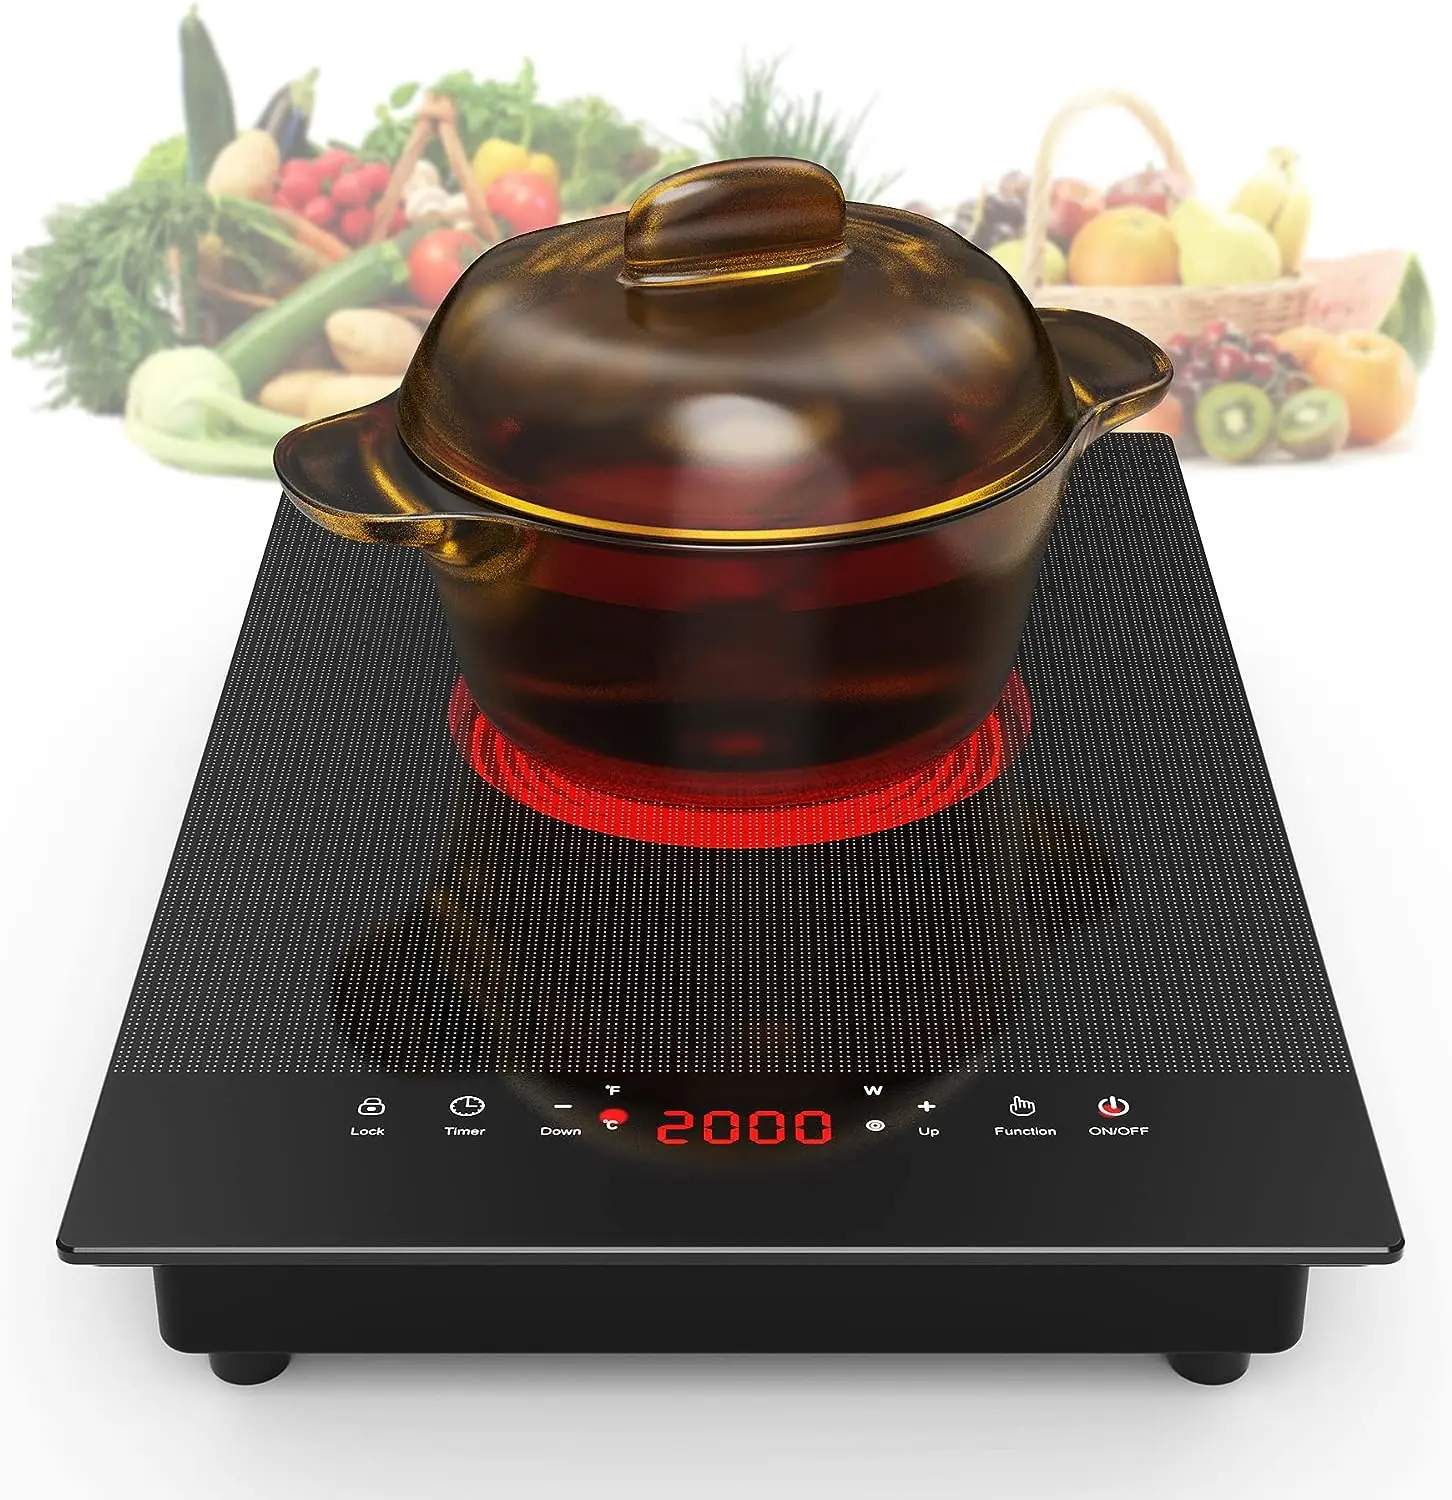 

Cooktop, Stove Top with Touch Control, 9 Power Levels, Kids Lock & Timer, Hot Surface Indicator, Overheat Protection,110V 2